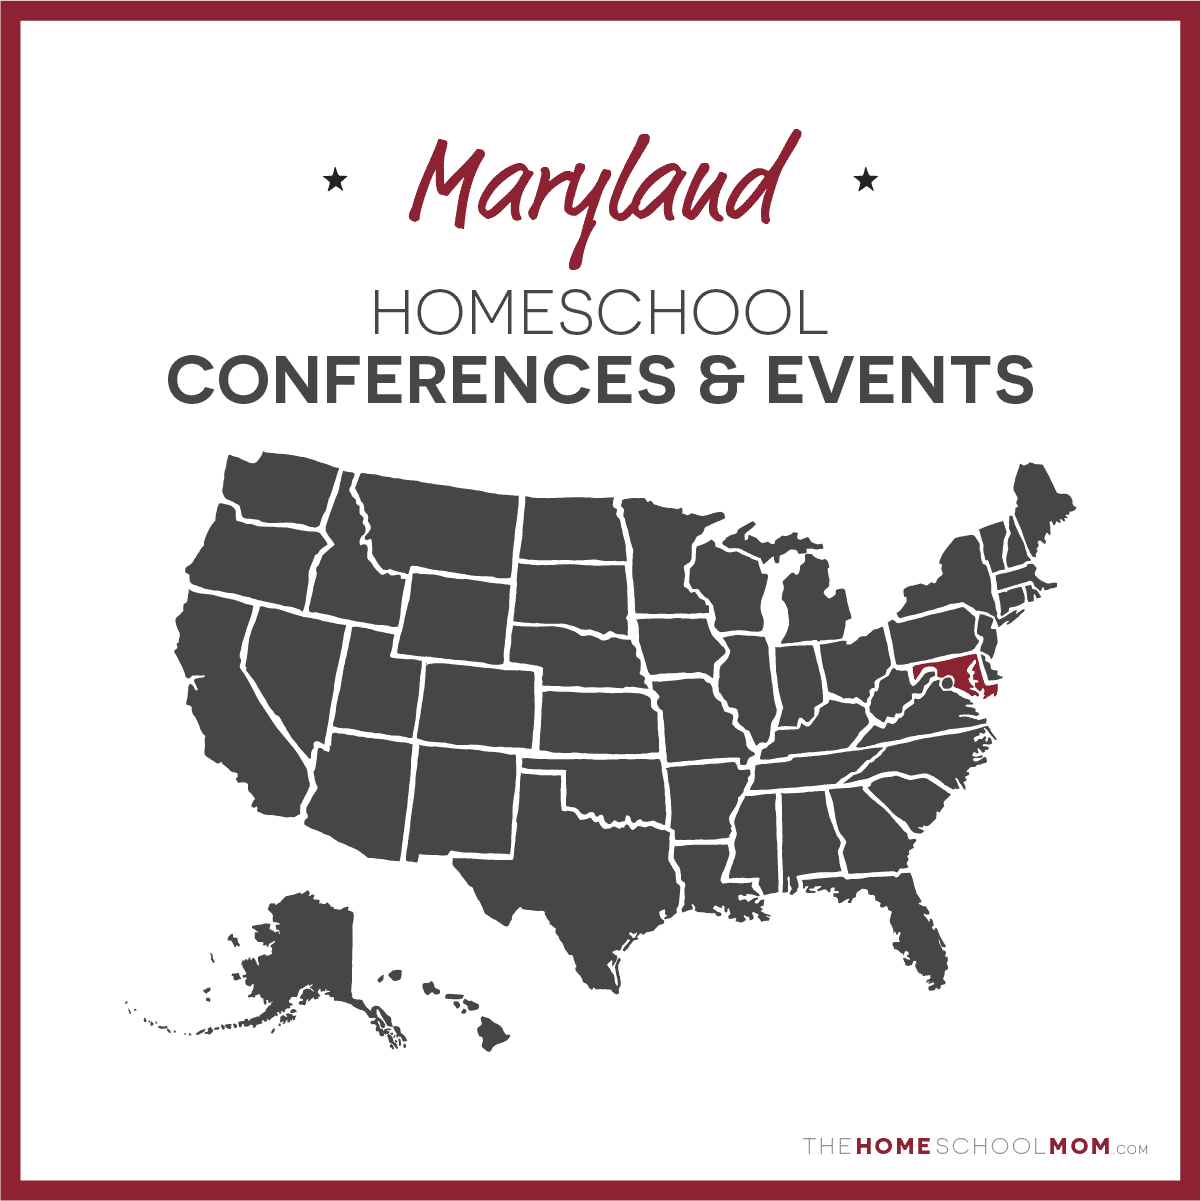 Maryland Homeschool Conventions, Conferences & Events